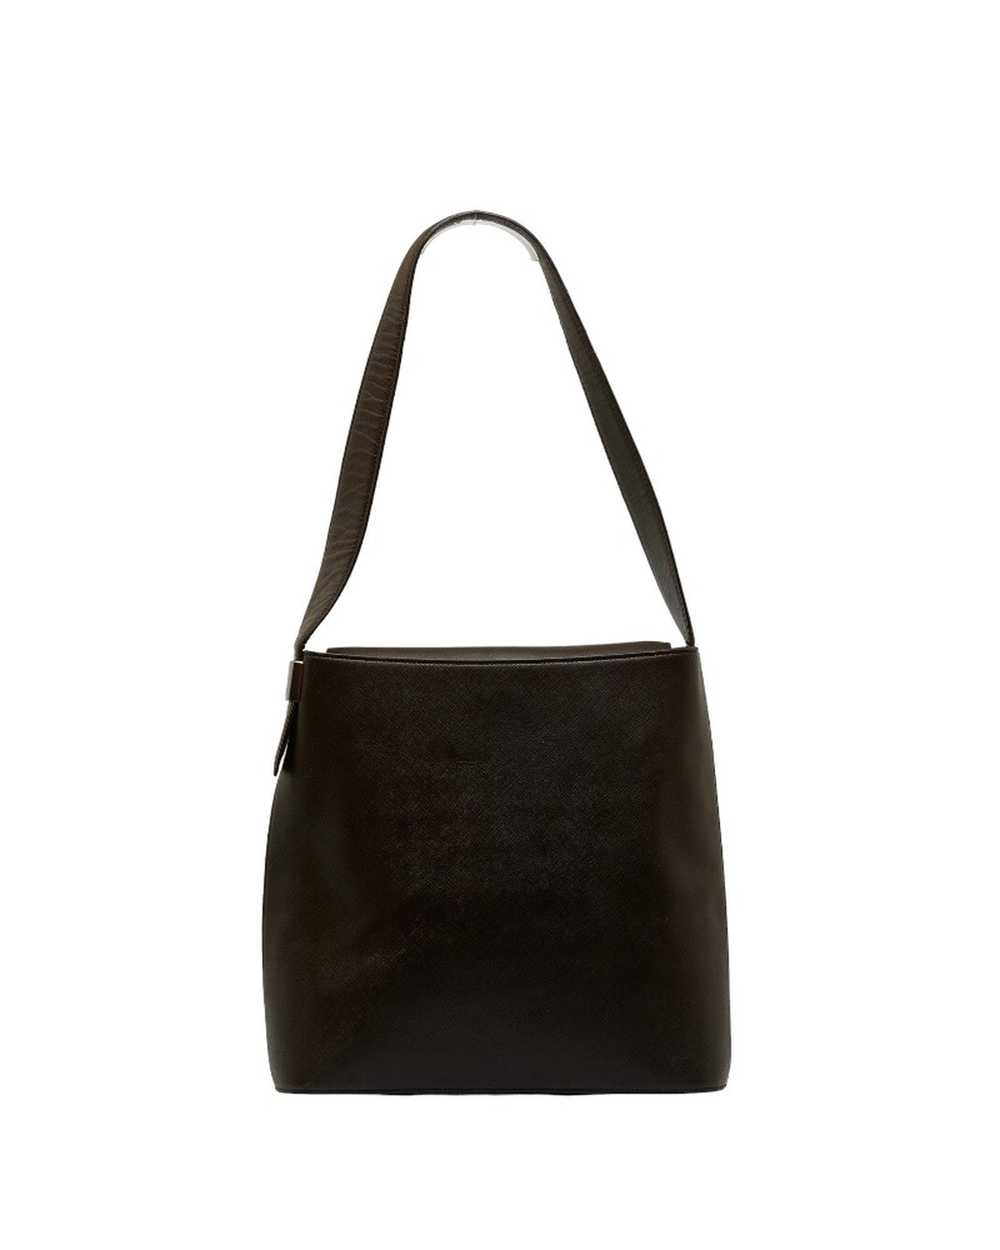 Burberry Brown Leather Shoulder Bag in AB Conditi… - image 1